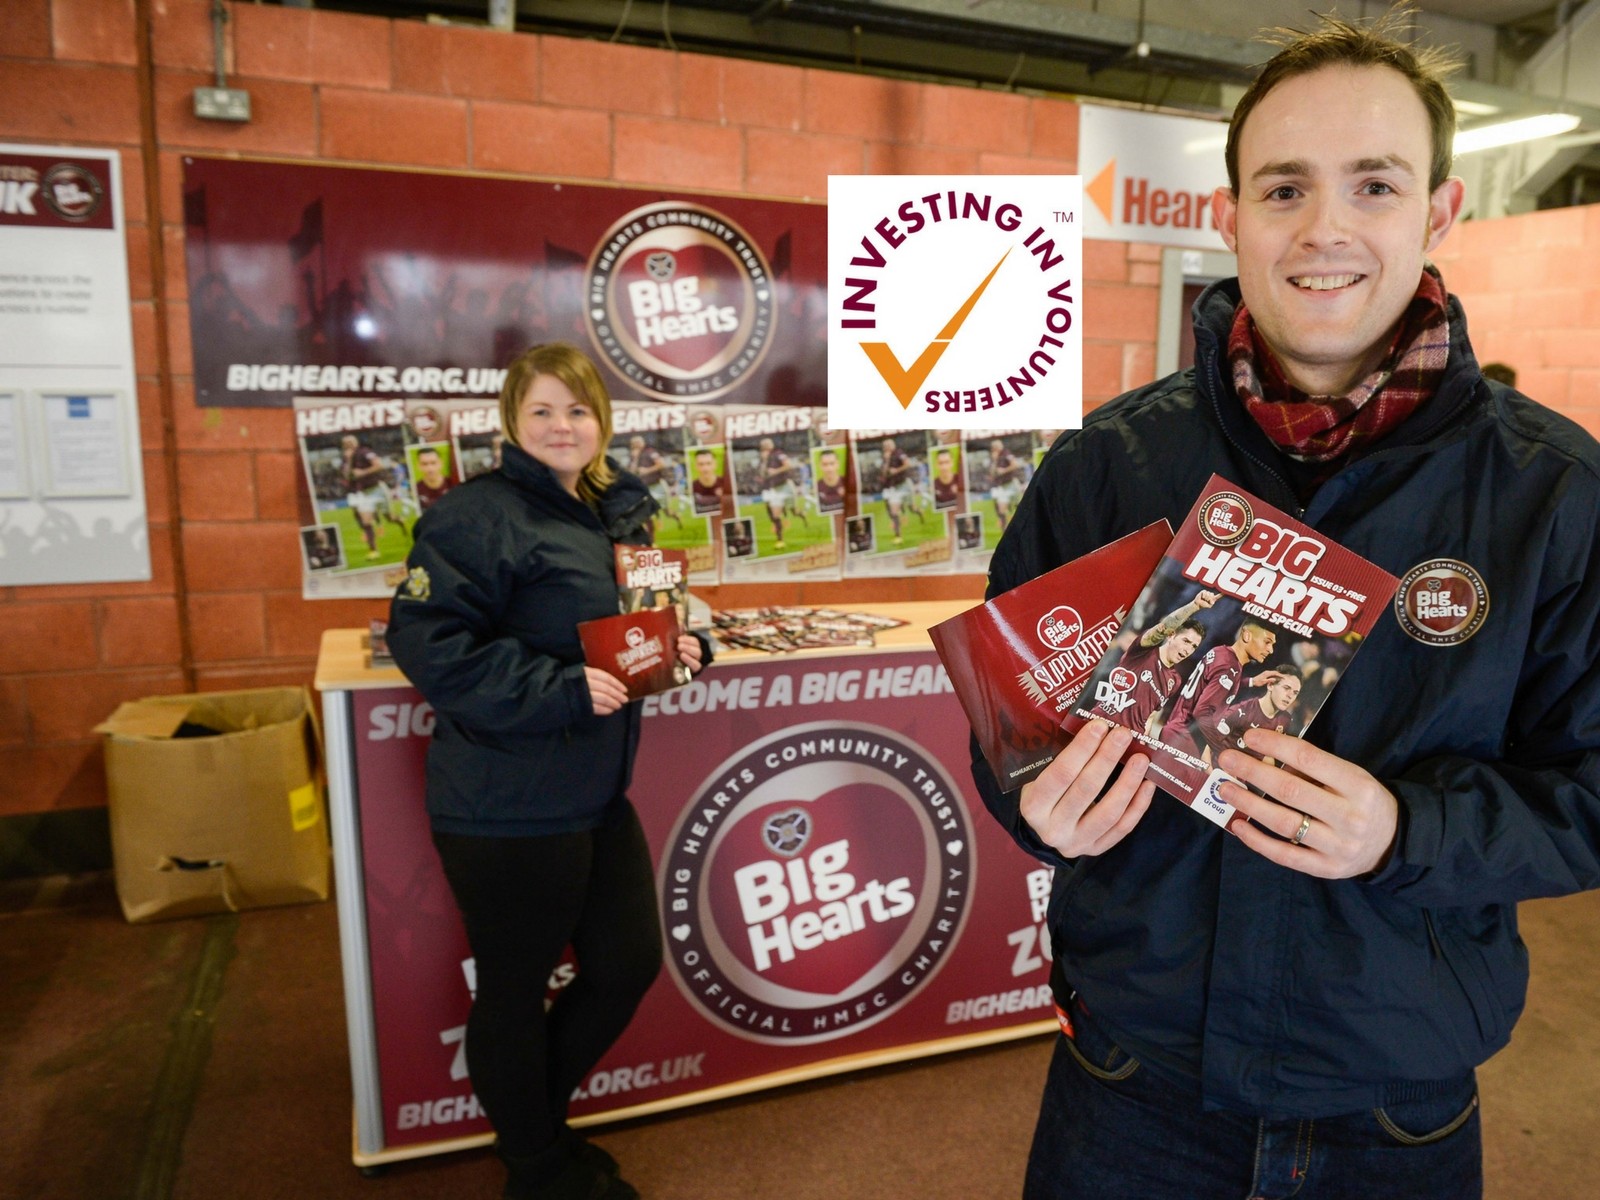  » Big Hearts, 1st charity in Scottish Football receiving the ‘Investing in Volunteers’ Award!